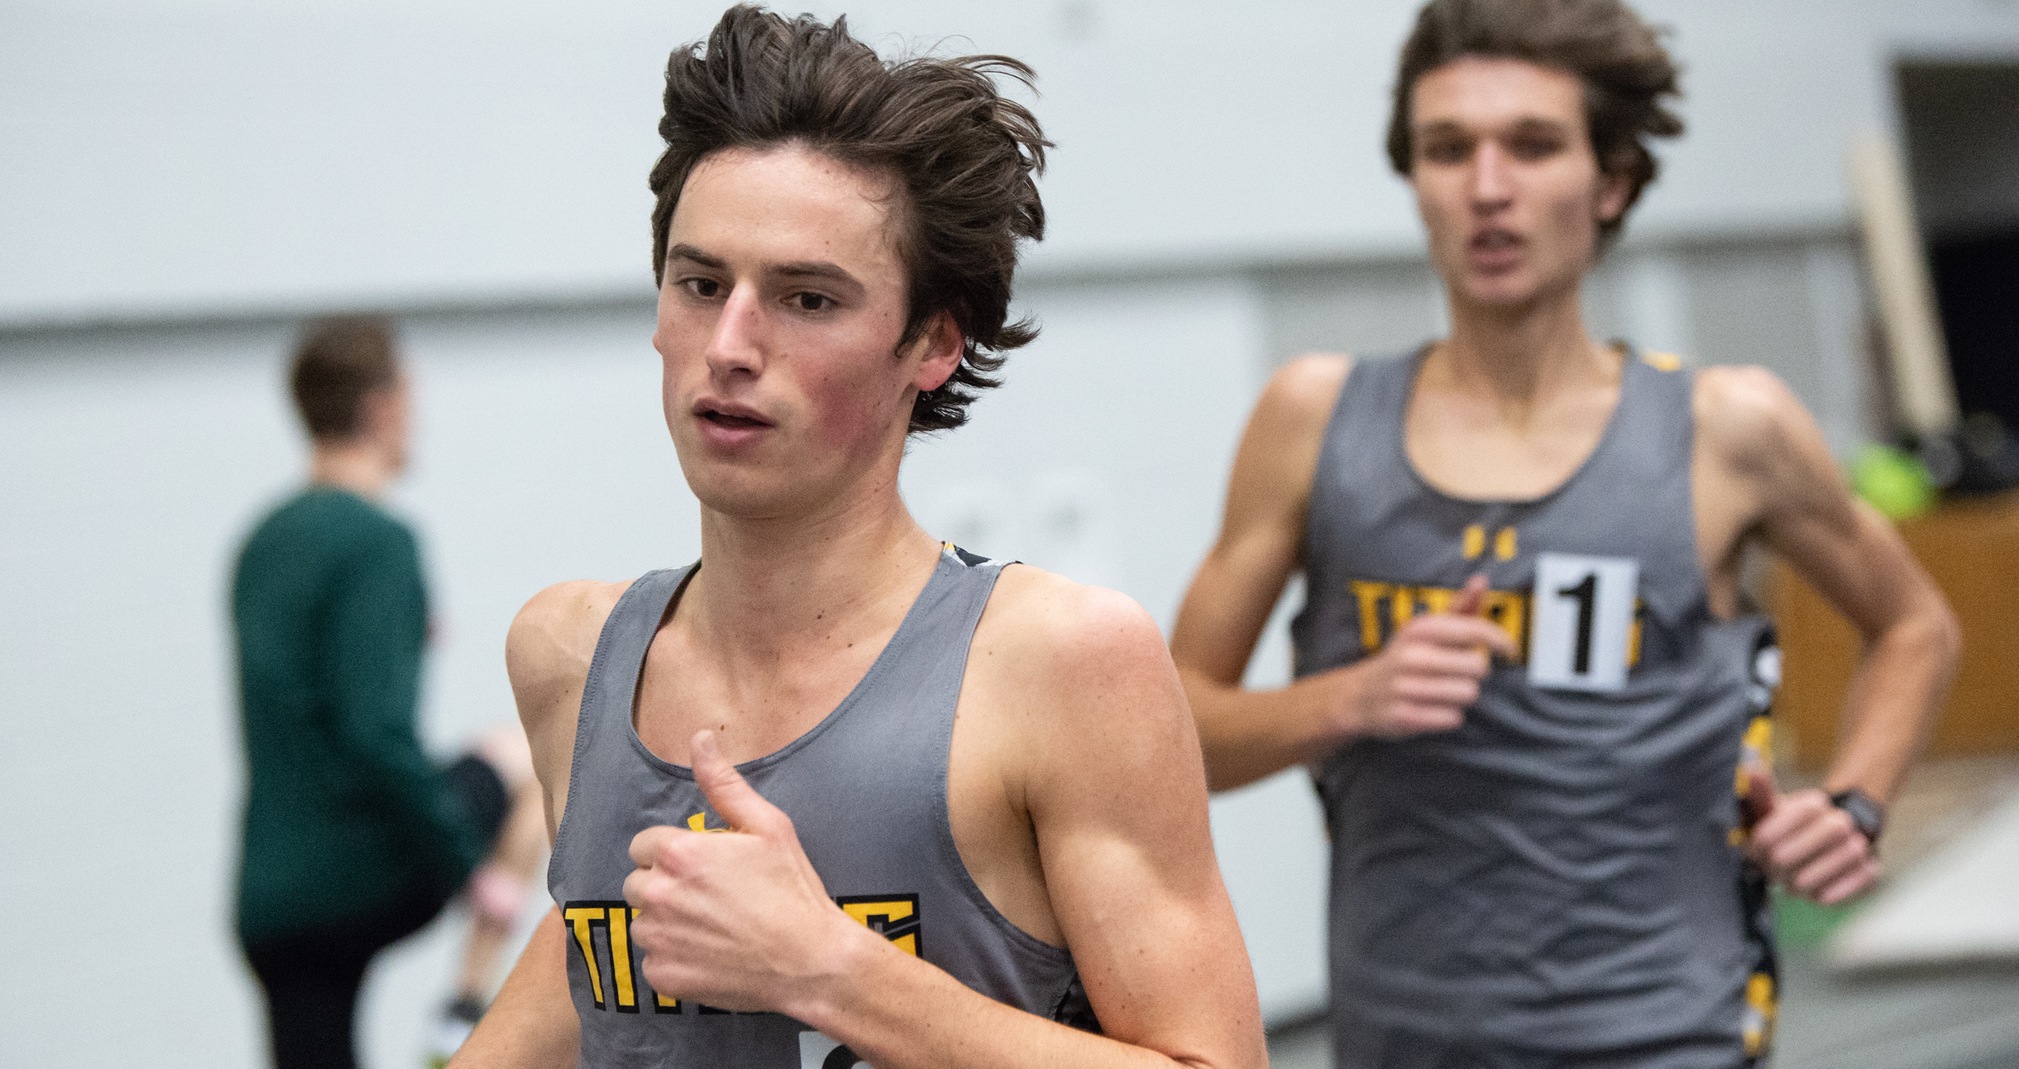 Lucas Weber (left) finished first and Cody Chadwick third in the 3,000-meter run at the Olivet Nazarene University Holiday Invitational.